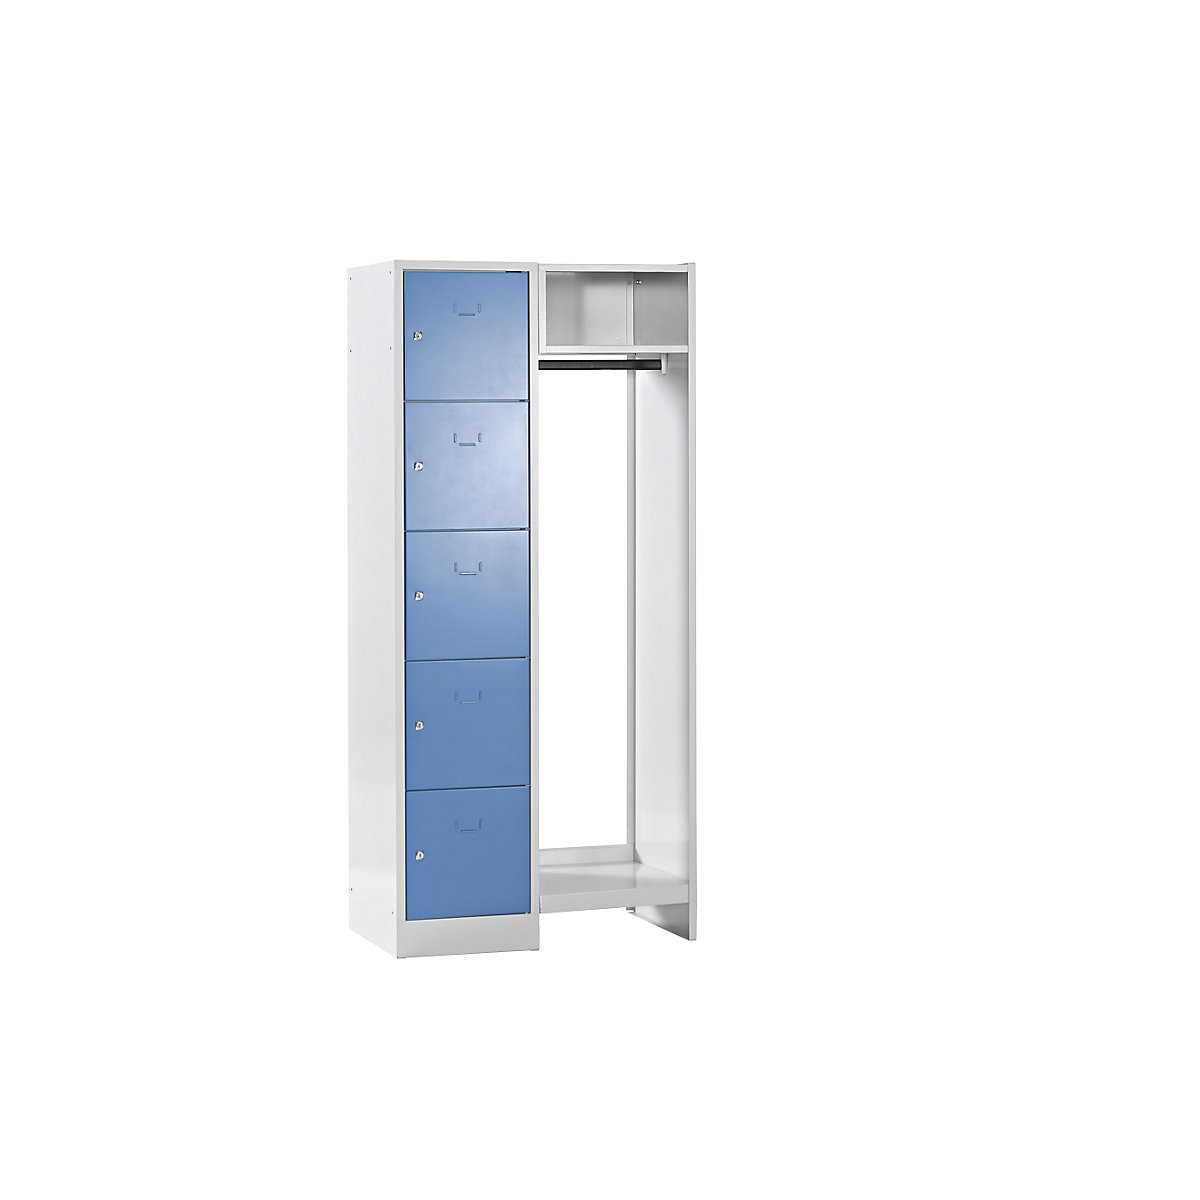 Cloakroom locker system – Wolf, 5 compartments on left, 5 coat hangers, overall width 850 mm, compartment width 398 mm, light blue / light grey-12